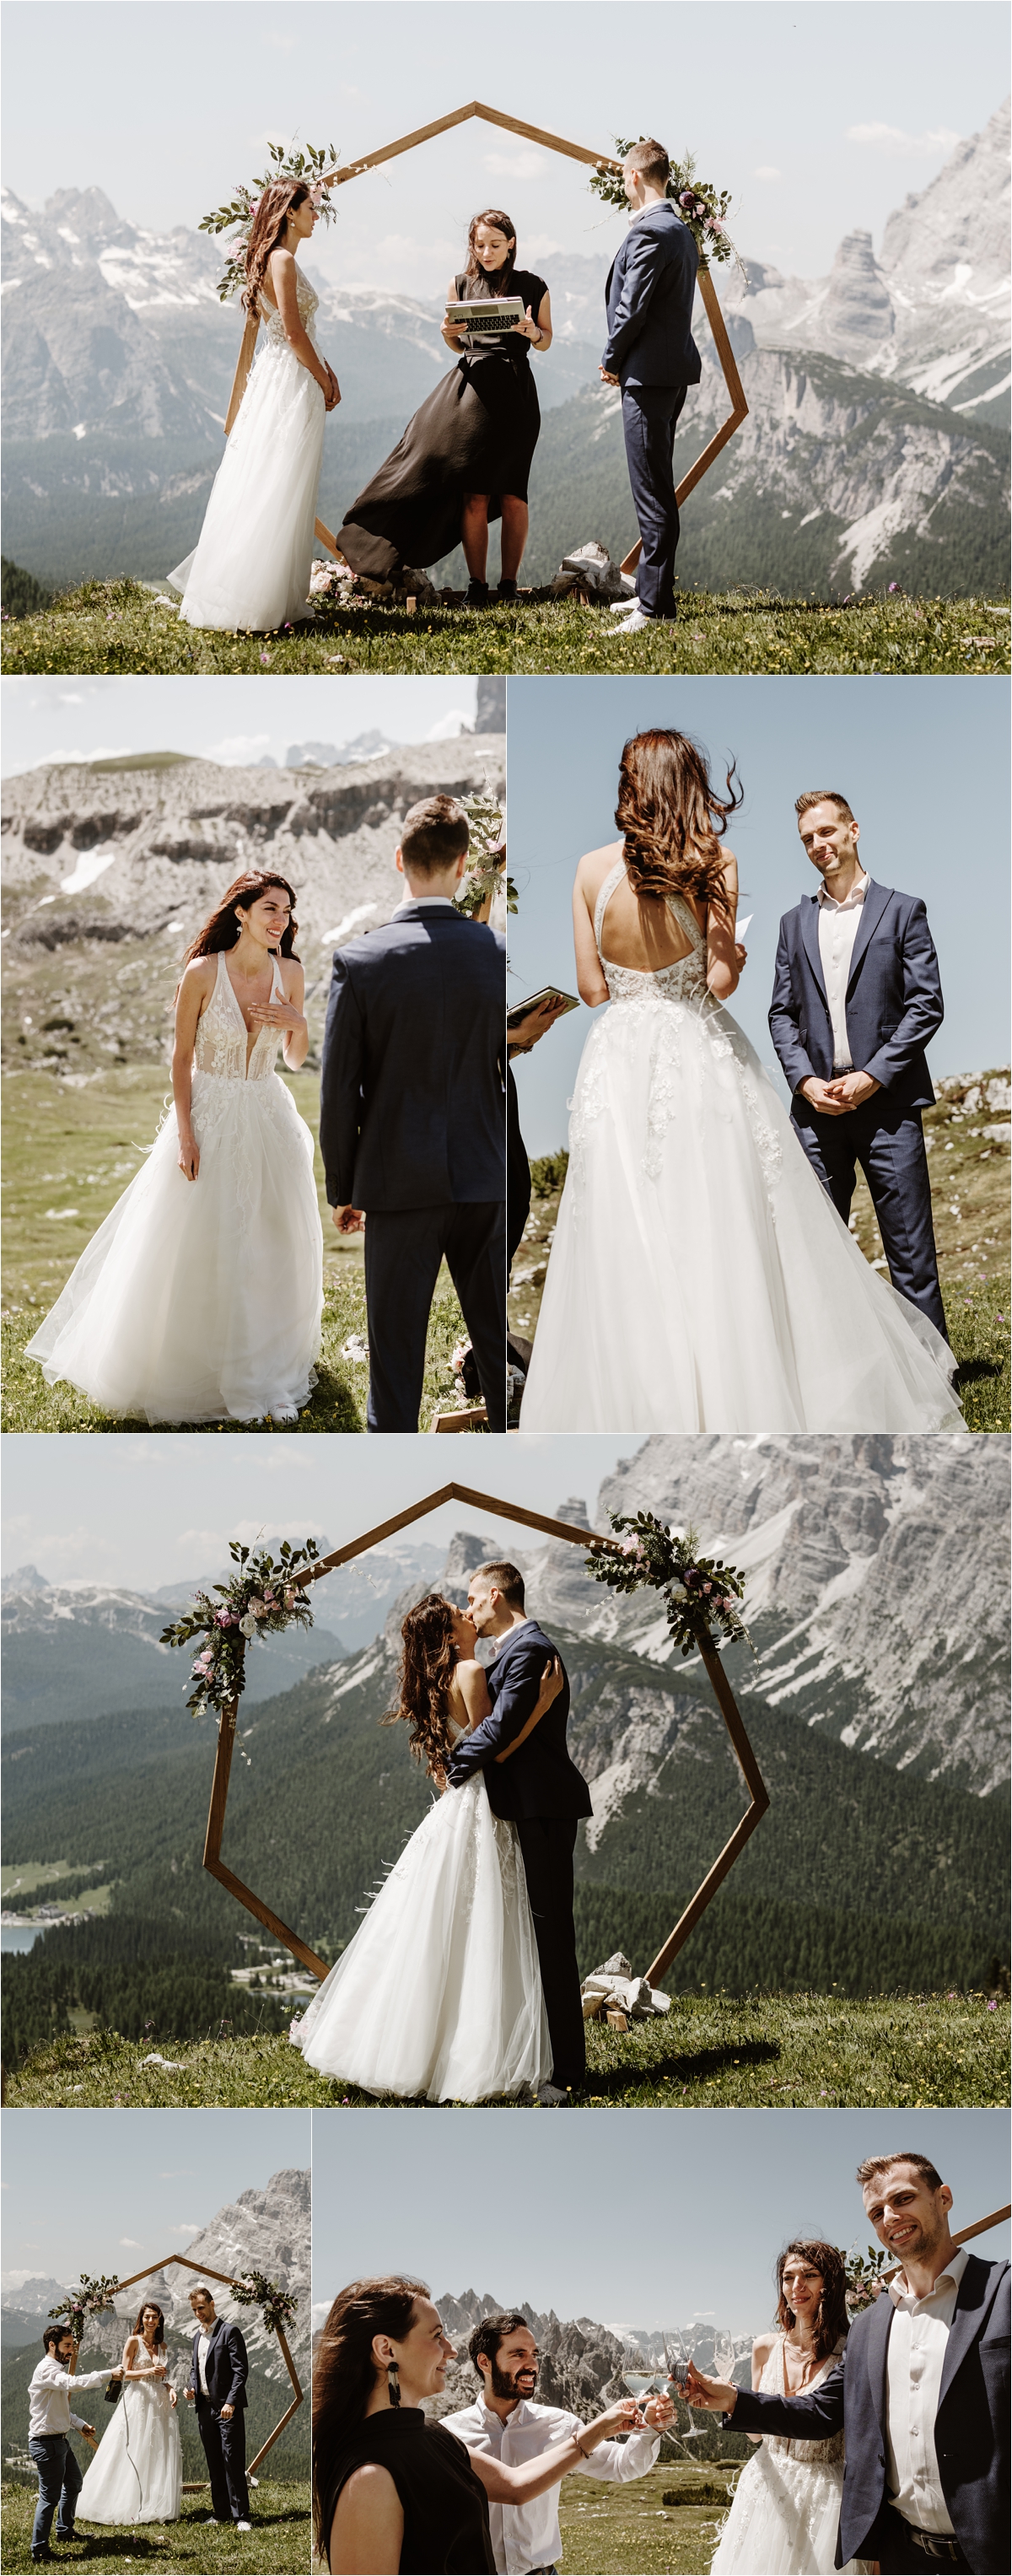 Petya & Tihomir's Tre Cime elopement ceremony with a wooden geometric ceremony arch. Photography by Wild Connections Photography